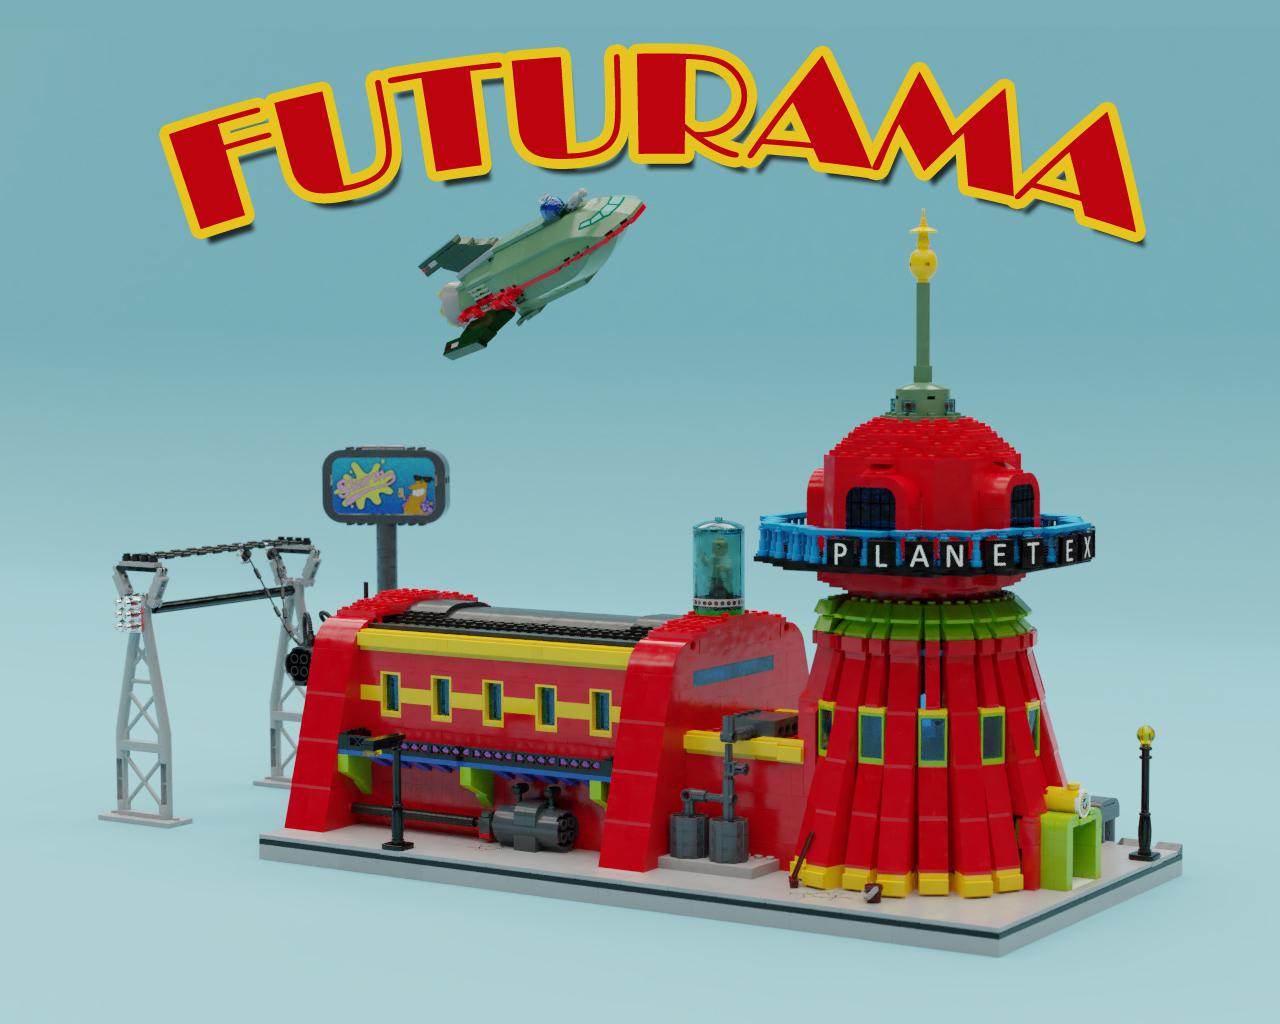 Good news everyone, only 800 to 10K. Lego Futurama is almost in review. Thank you.